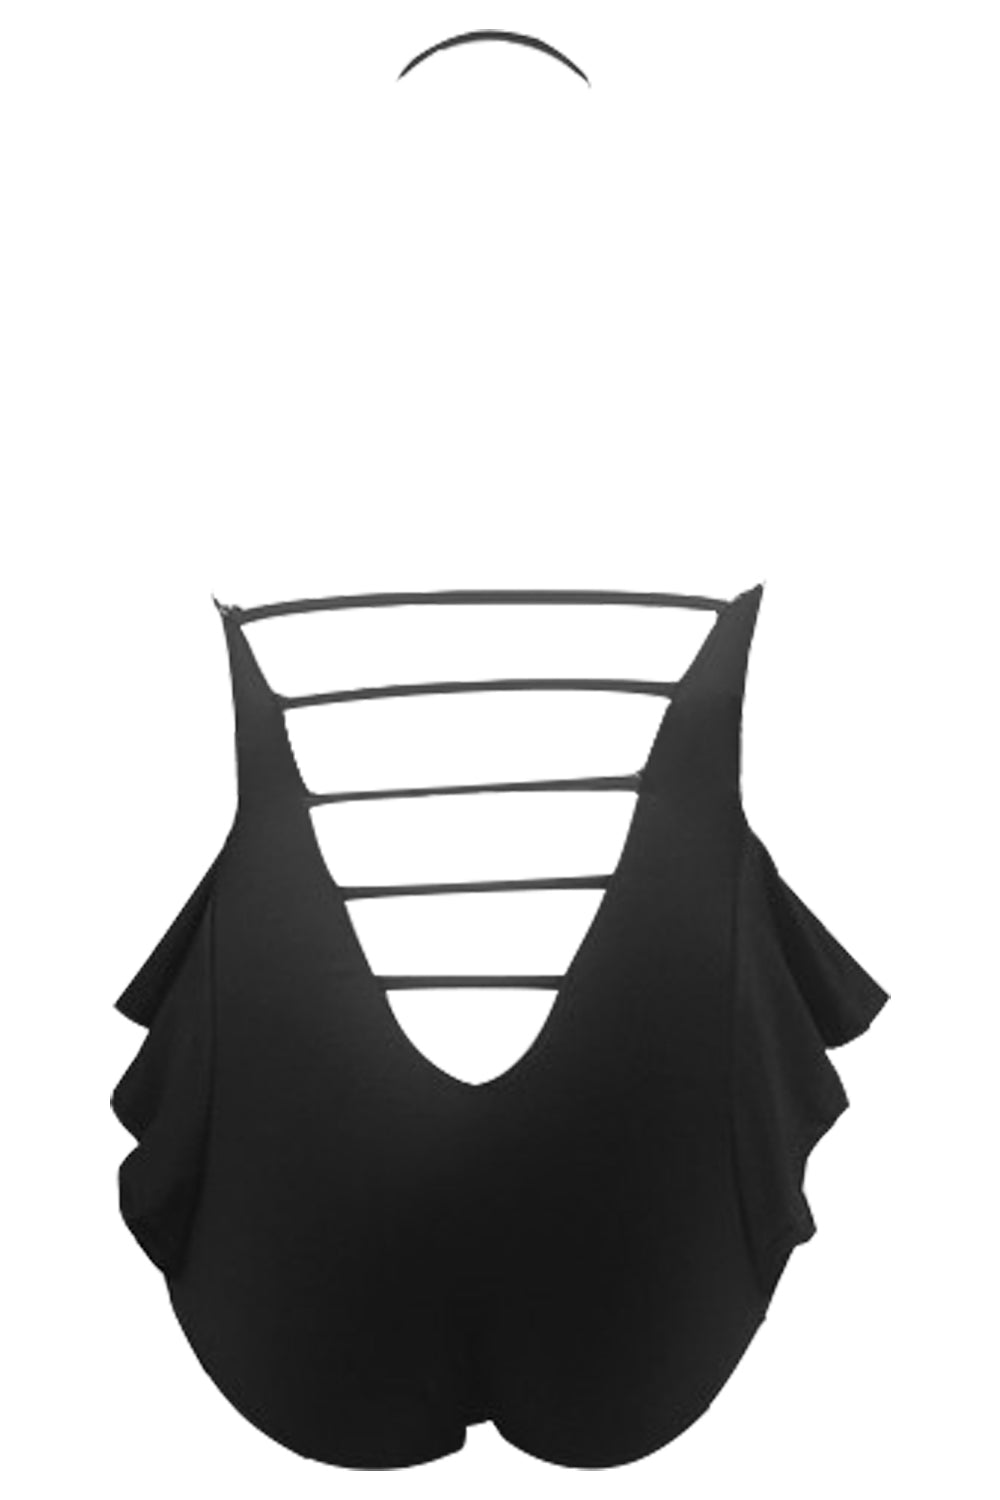 Iyasson Come With Me Off-shoulder Design One-piece Swimsuit